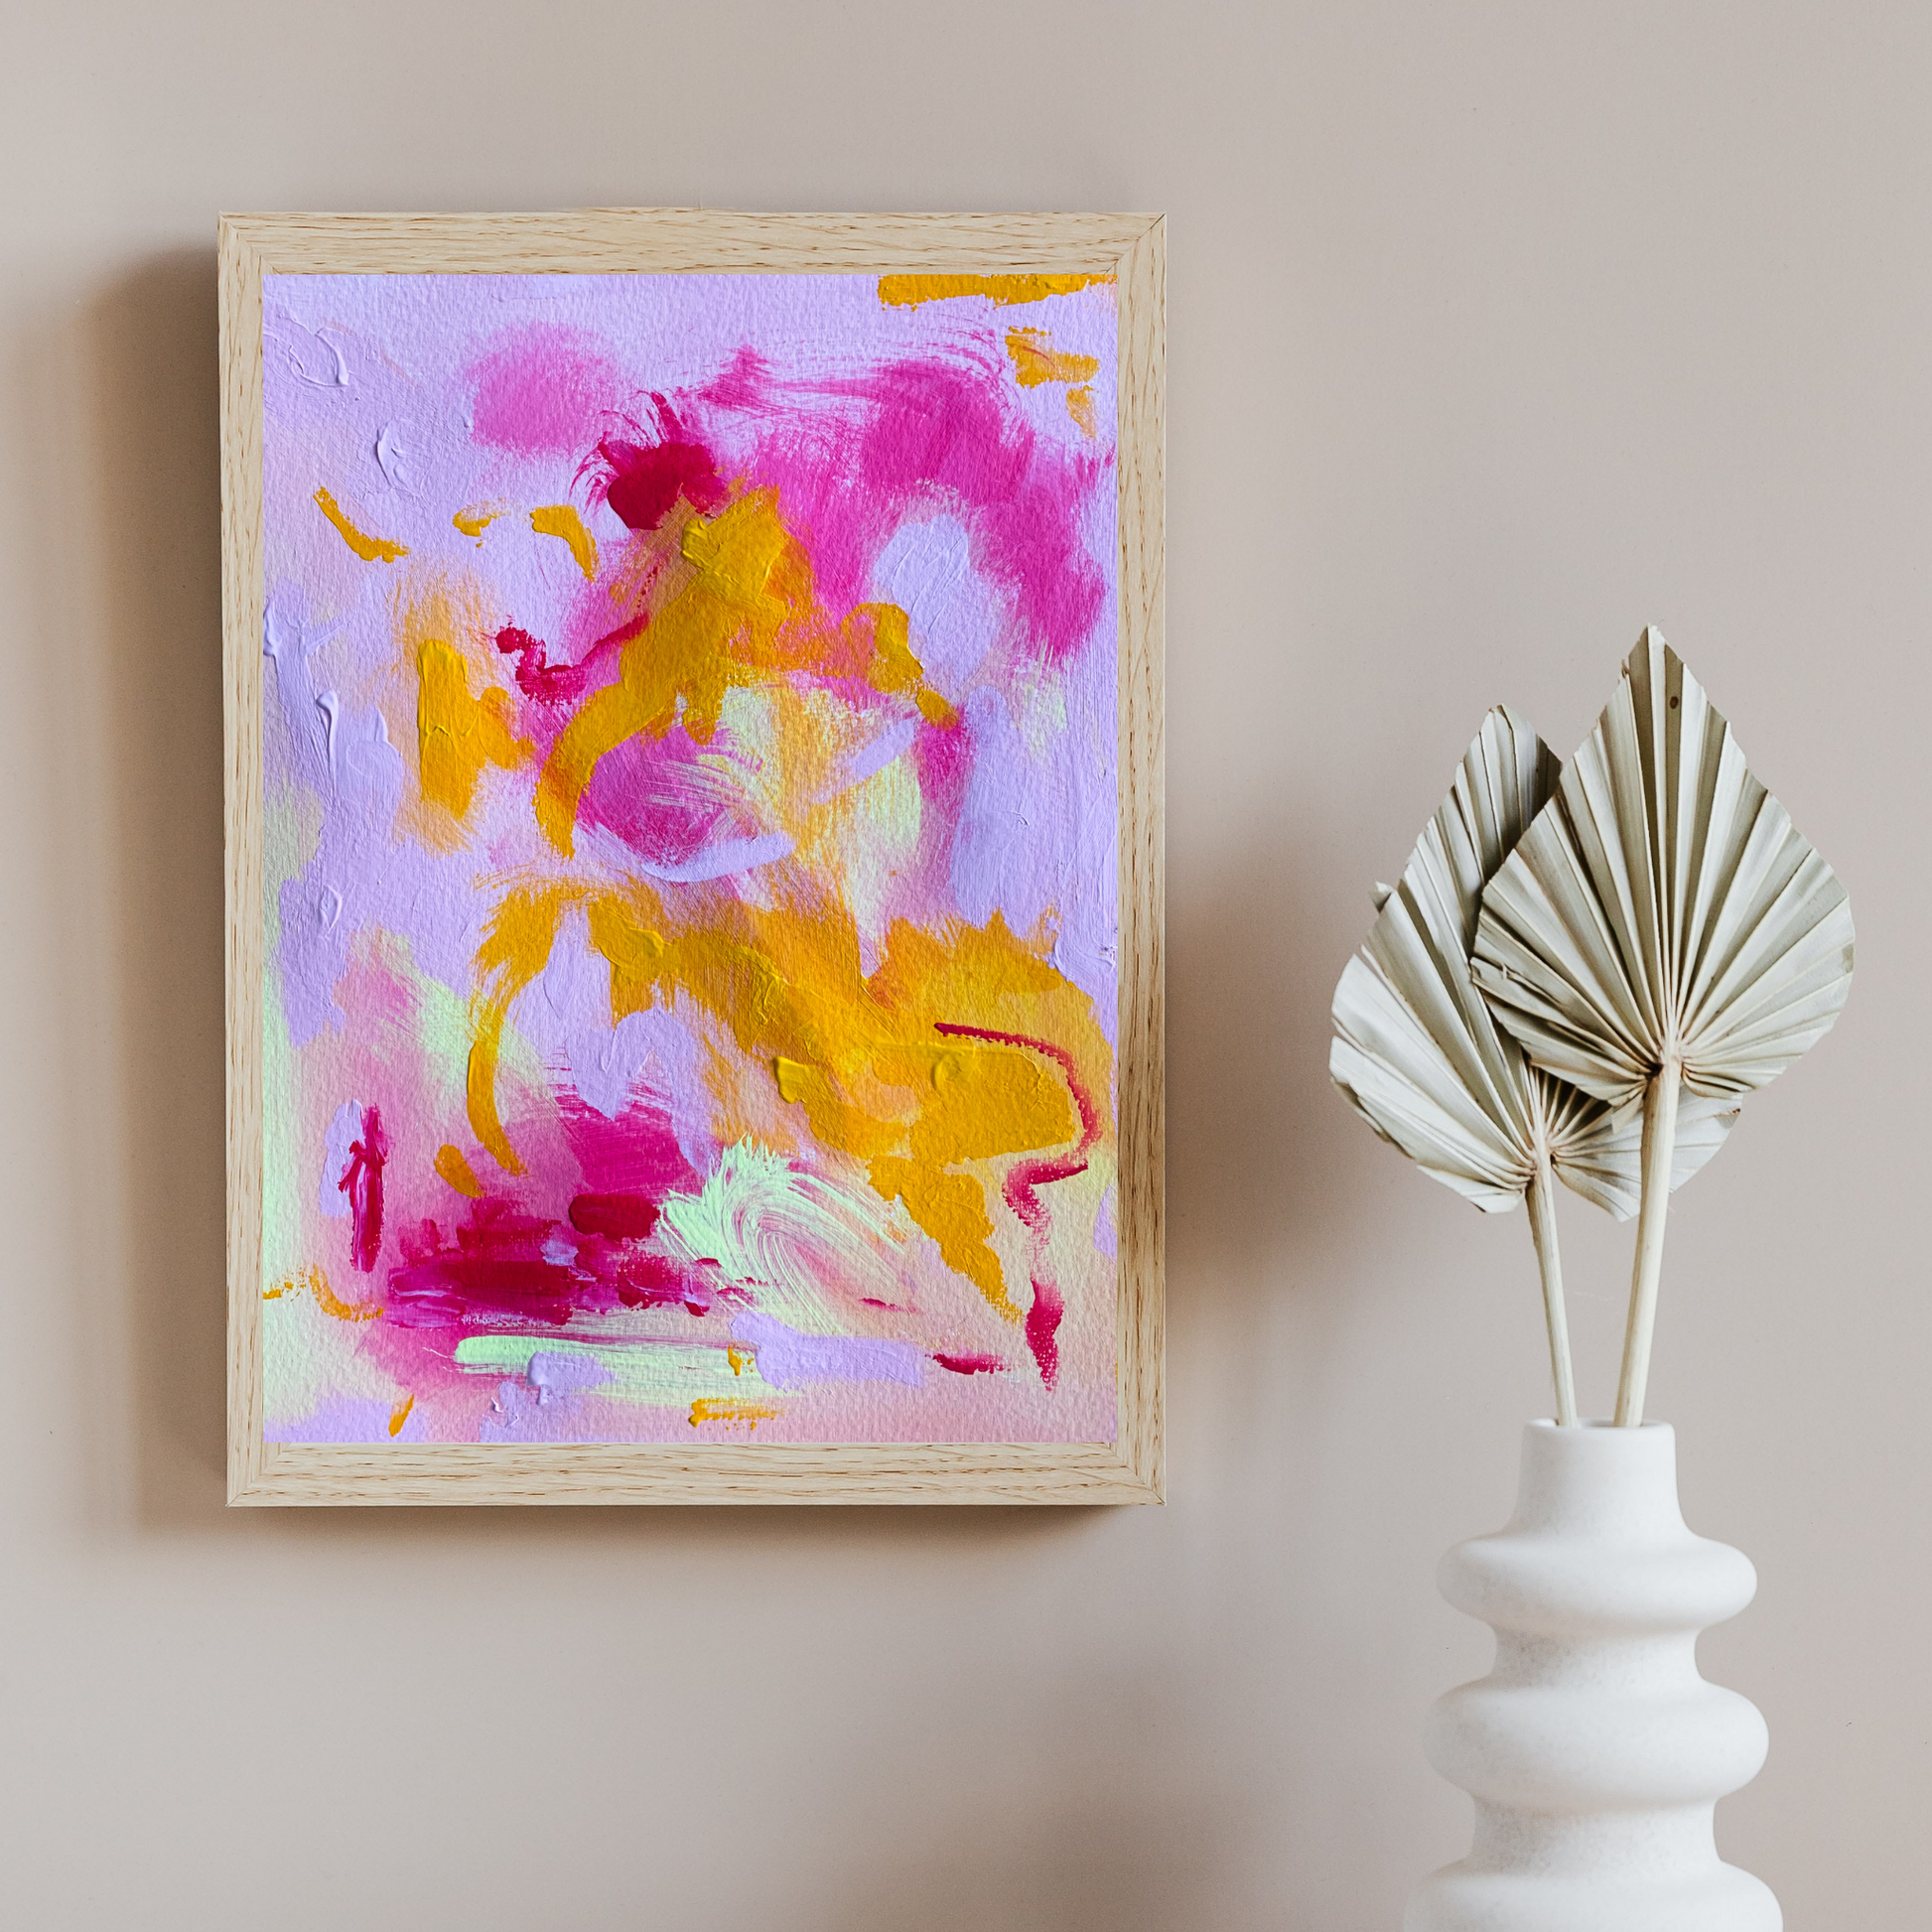 A tan wall with a white vase and paper leaves on the right. On the left is a wooden frame with a bright pink, purple, and orange abstract painting in it.